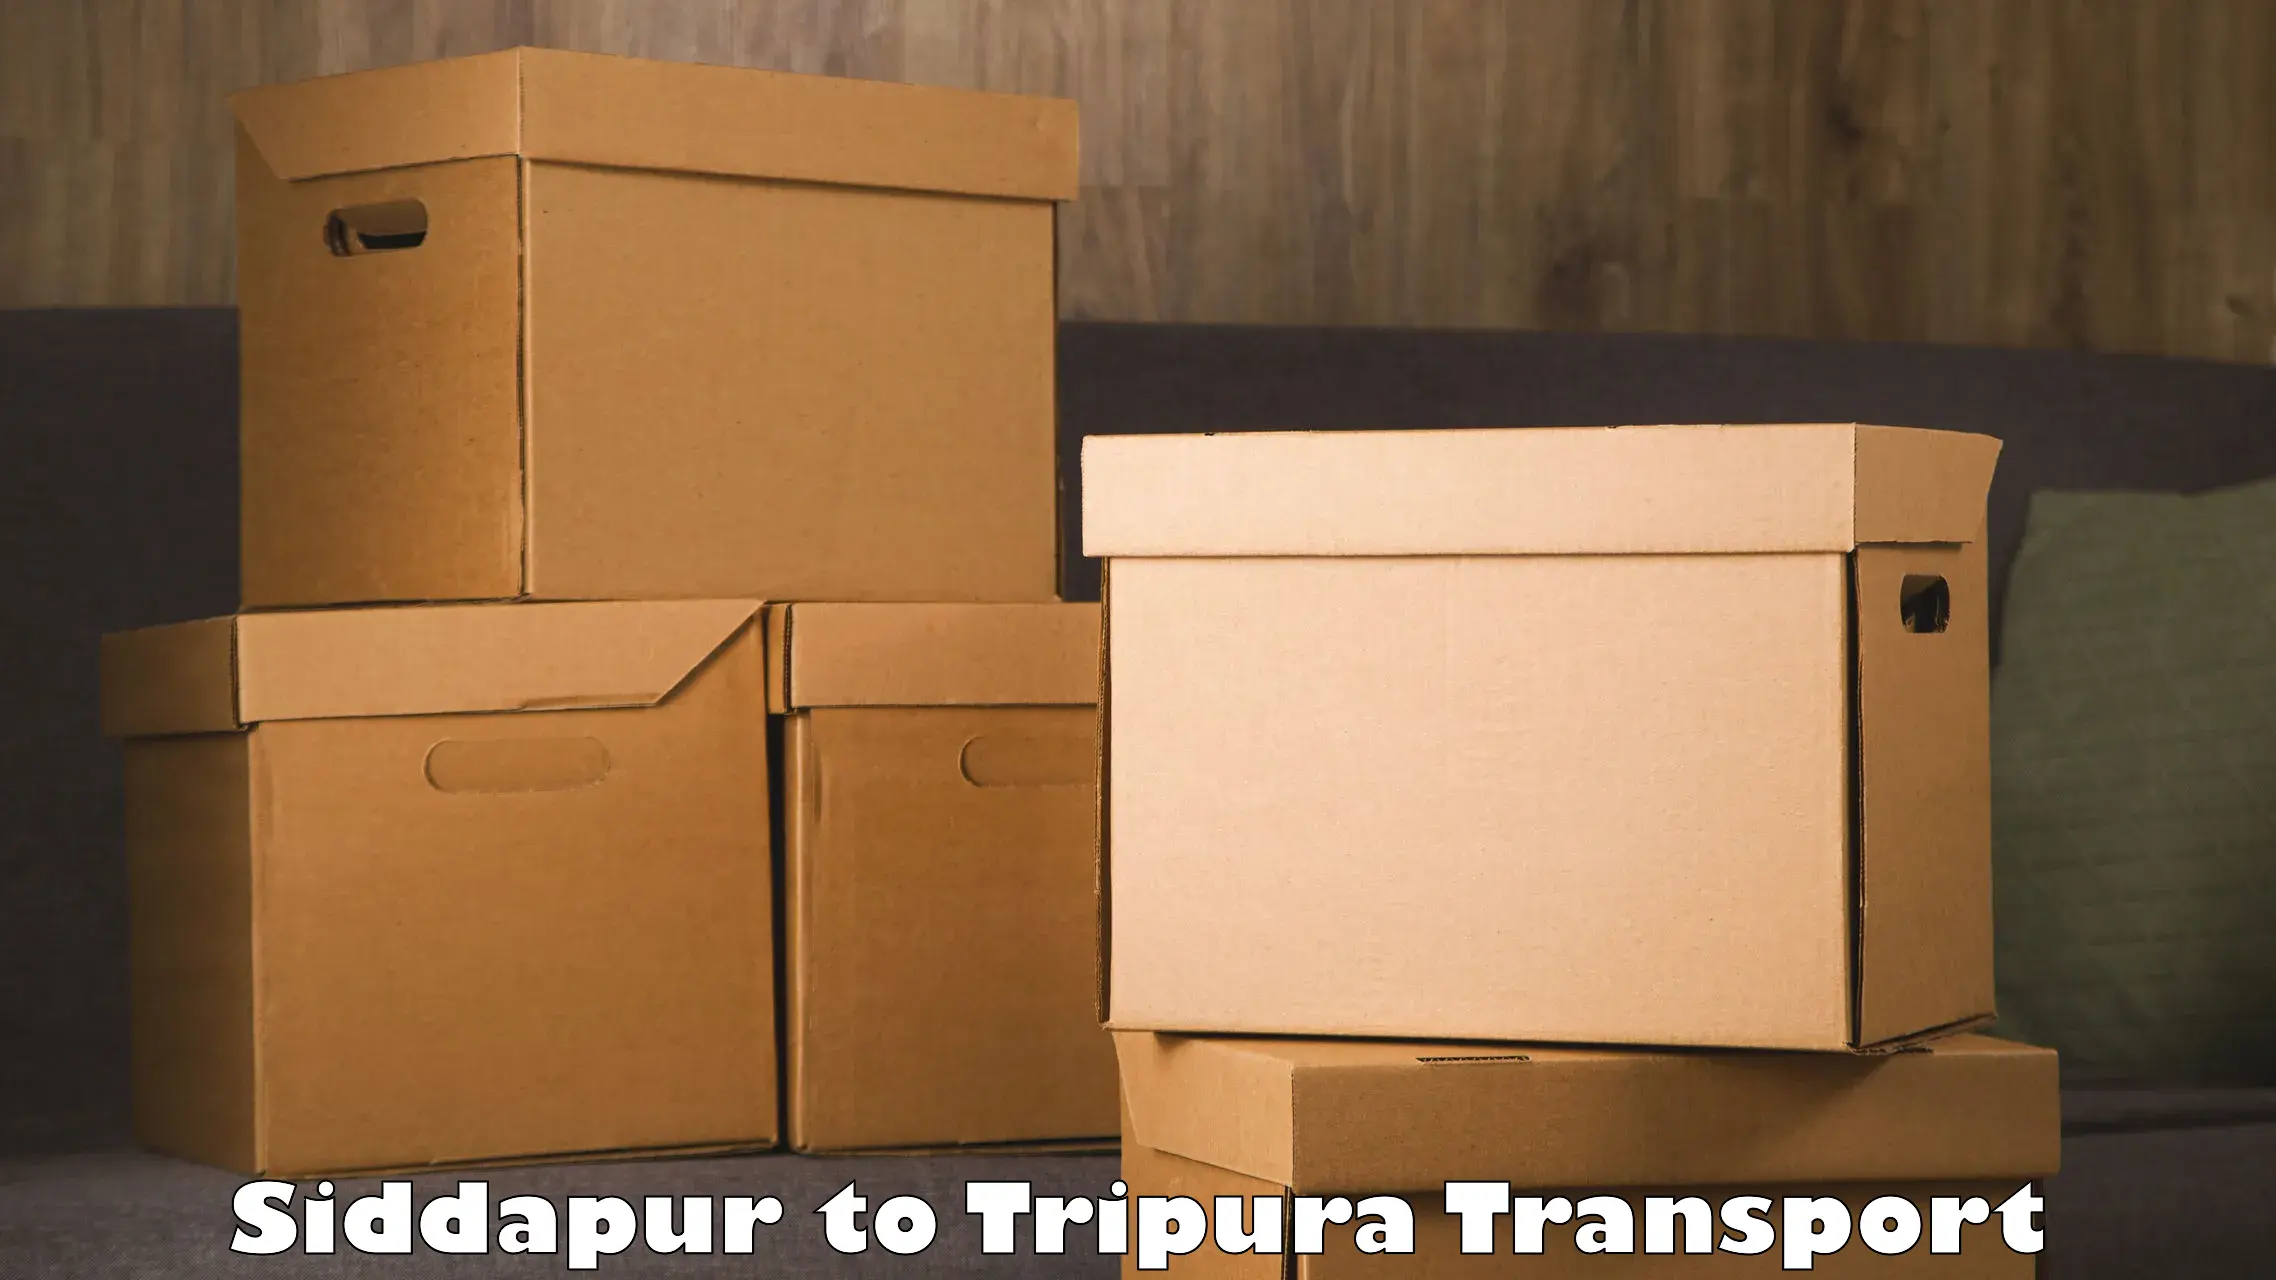 Nearby transport service Siddapur to Tripura